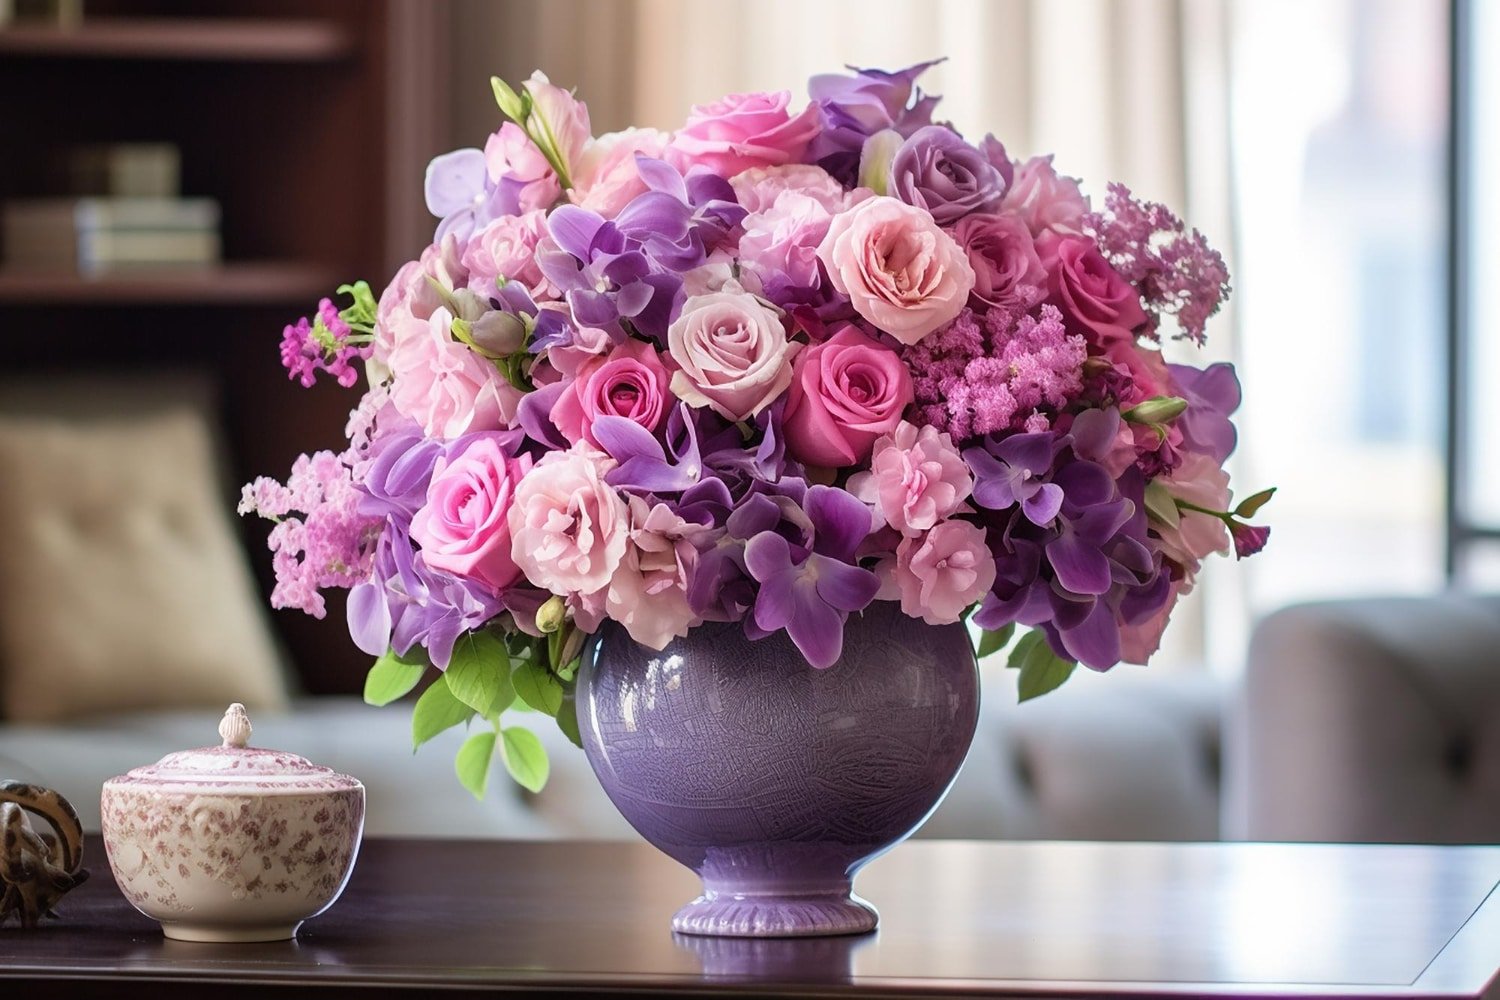 Read more about the article Celebrate Life’s Moments With Blooms Today’s Fresh Flower Deliveries